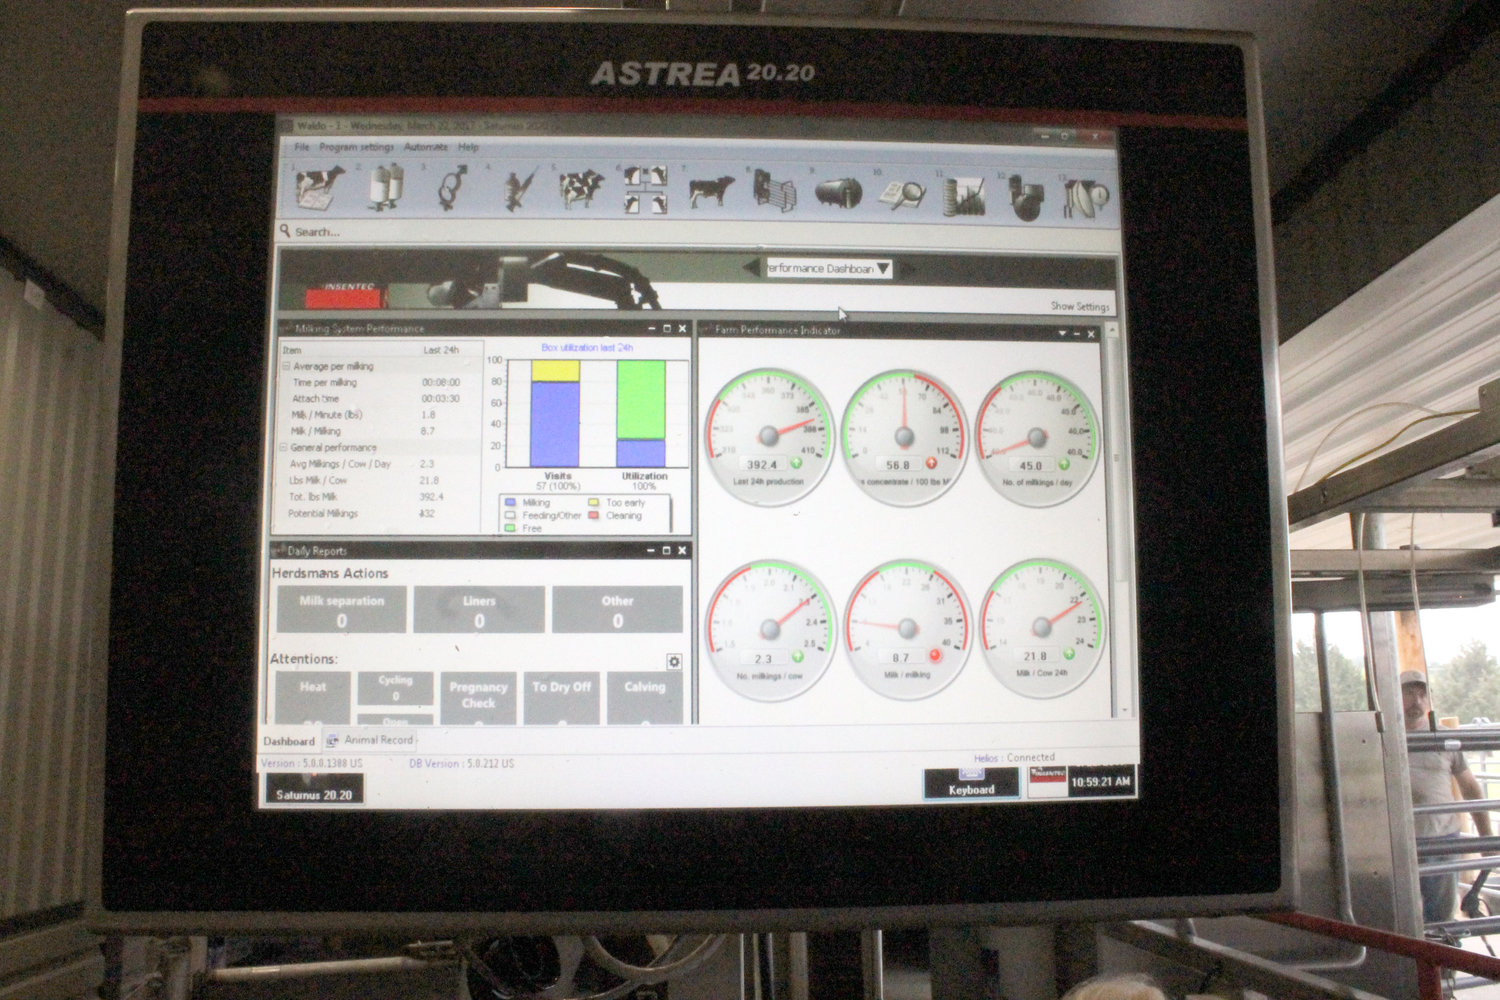 The computerization of the milking process allows milk to be analyzed and if any problems are detected, provides information on what needs to be done for the individual cow. (Monitor photo by Doris Newman)